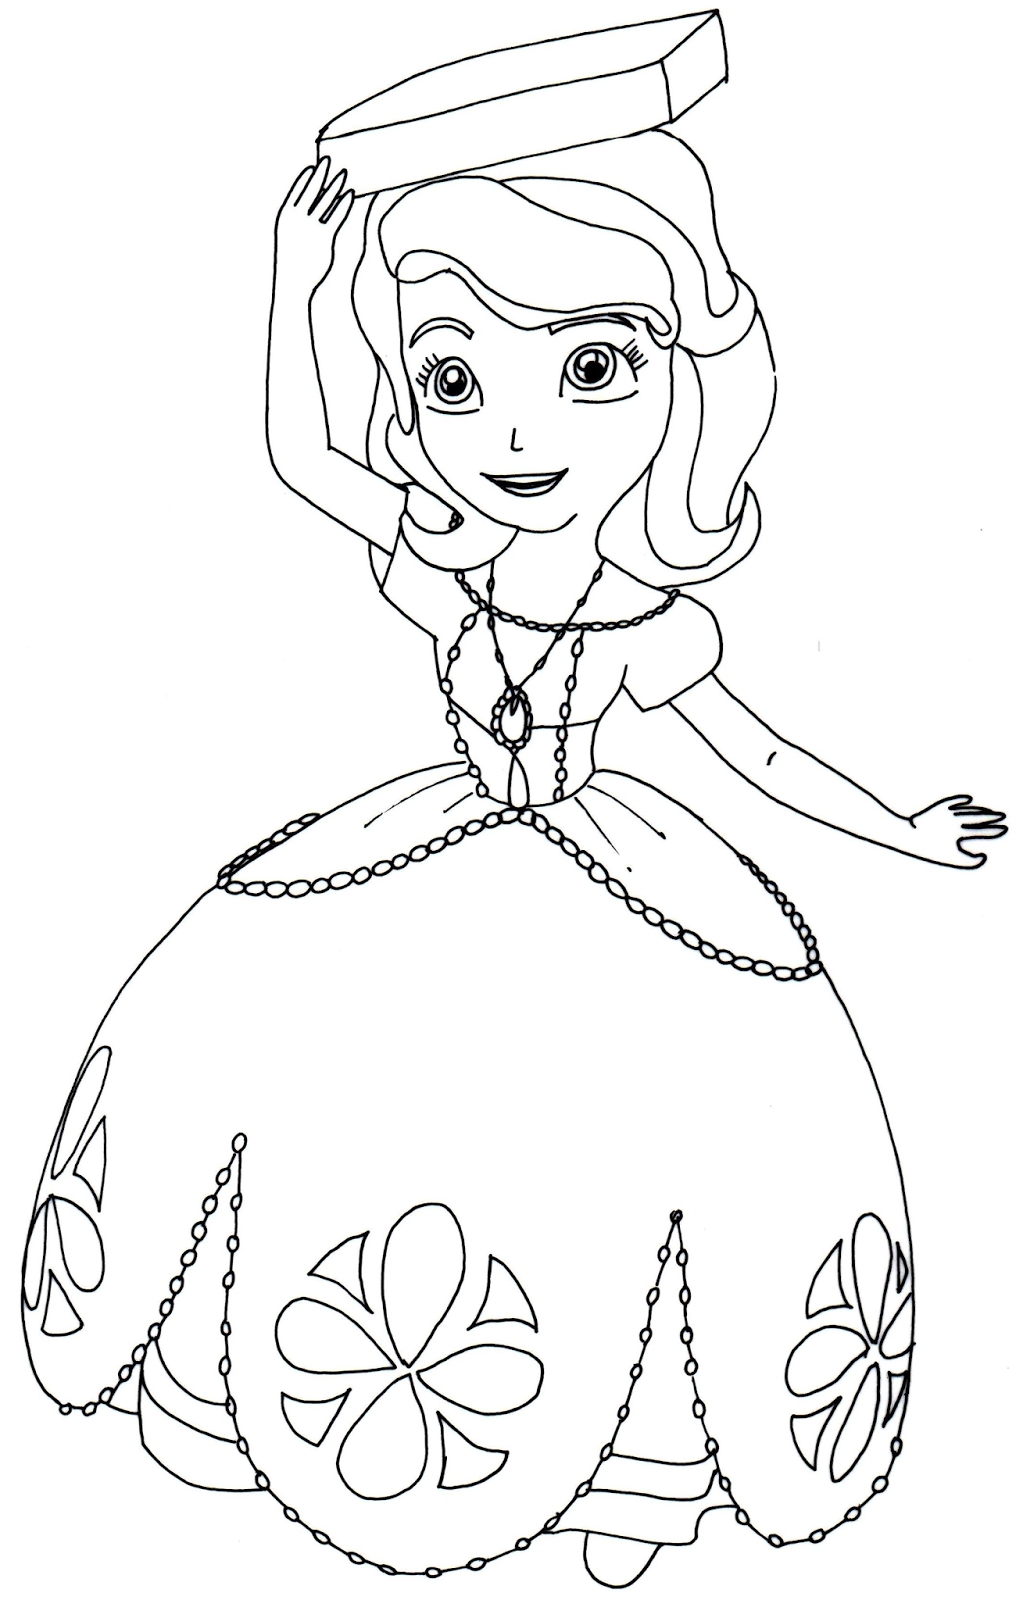 Sofia Coloring Pages at GetColorings.com | Free printable colorings ...